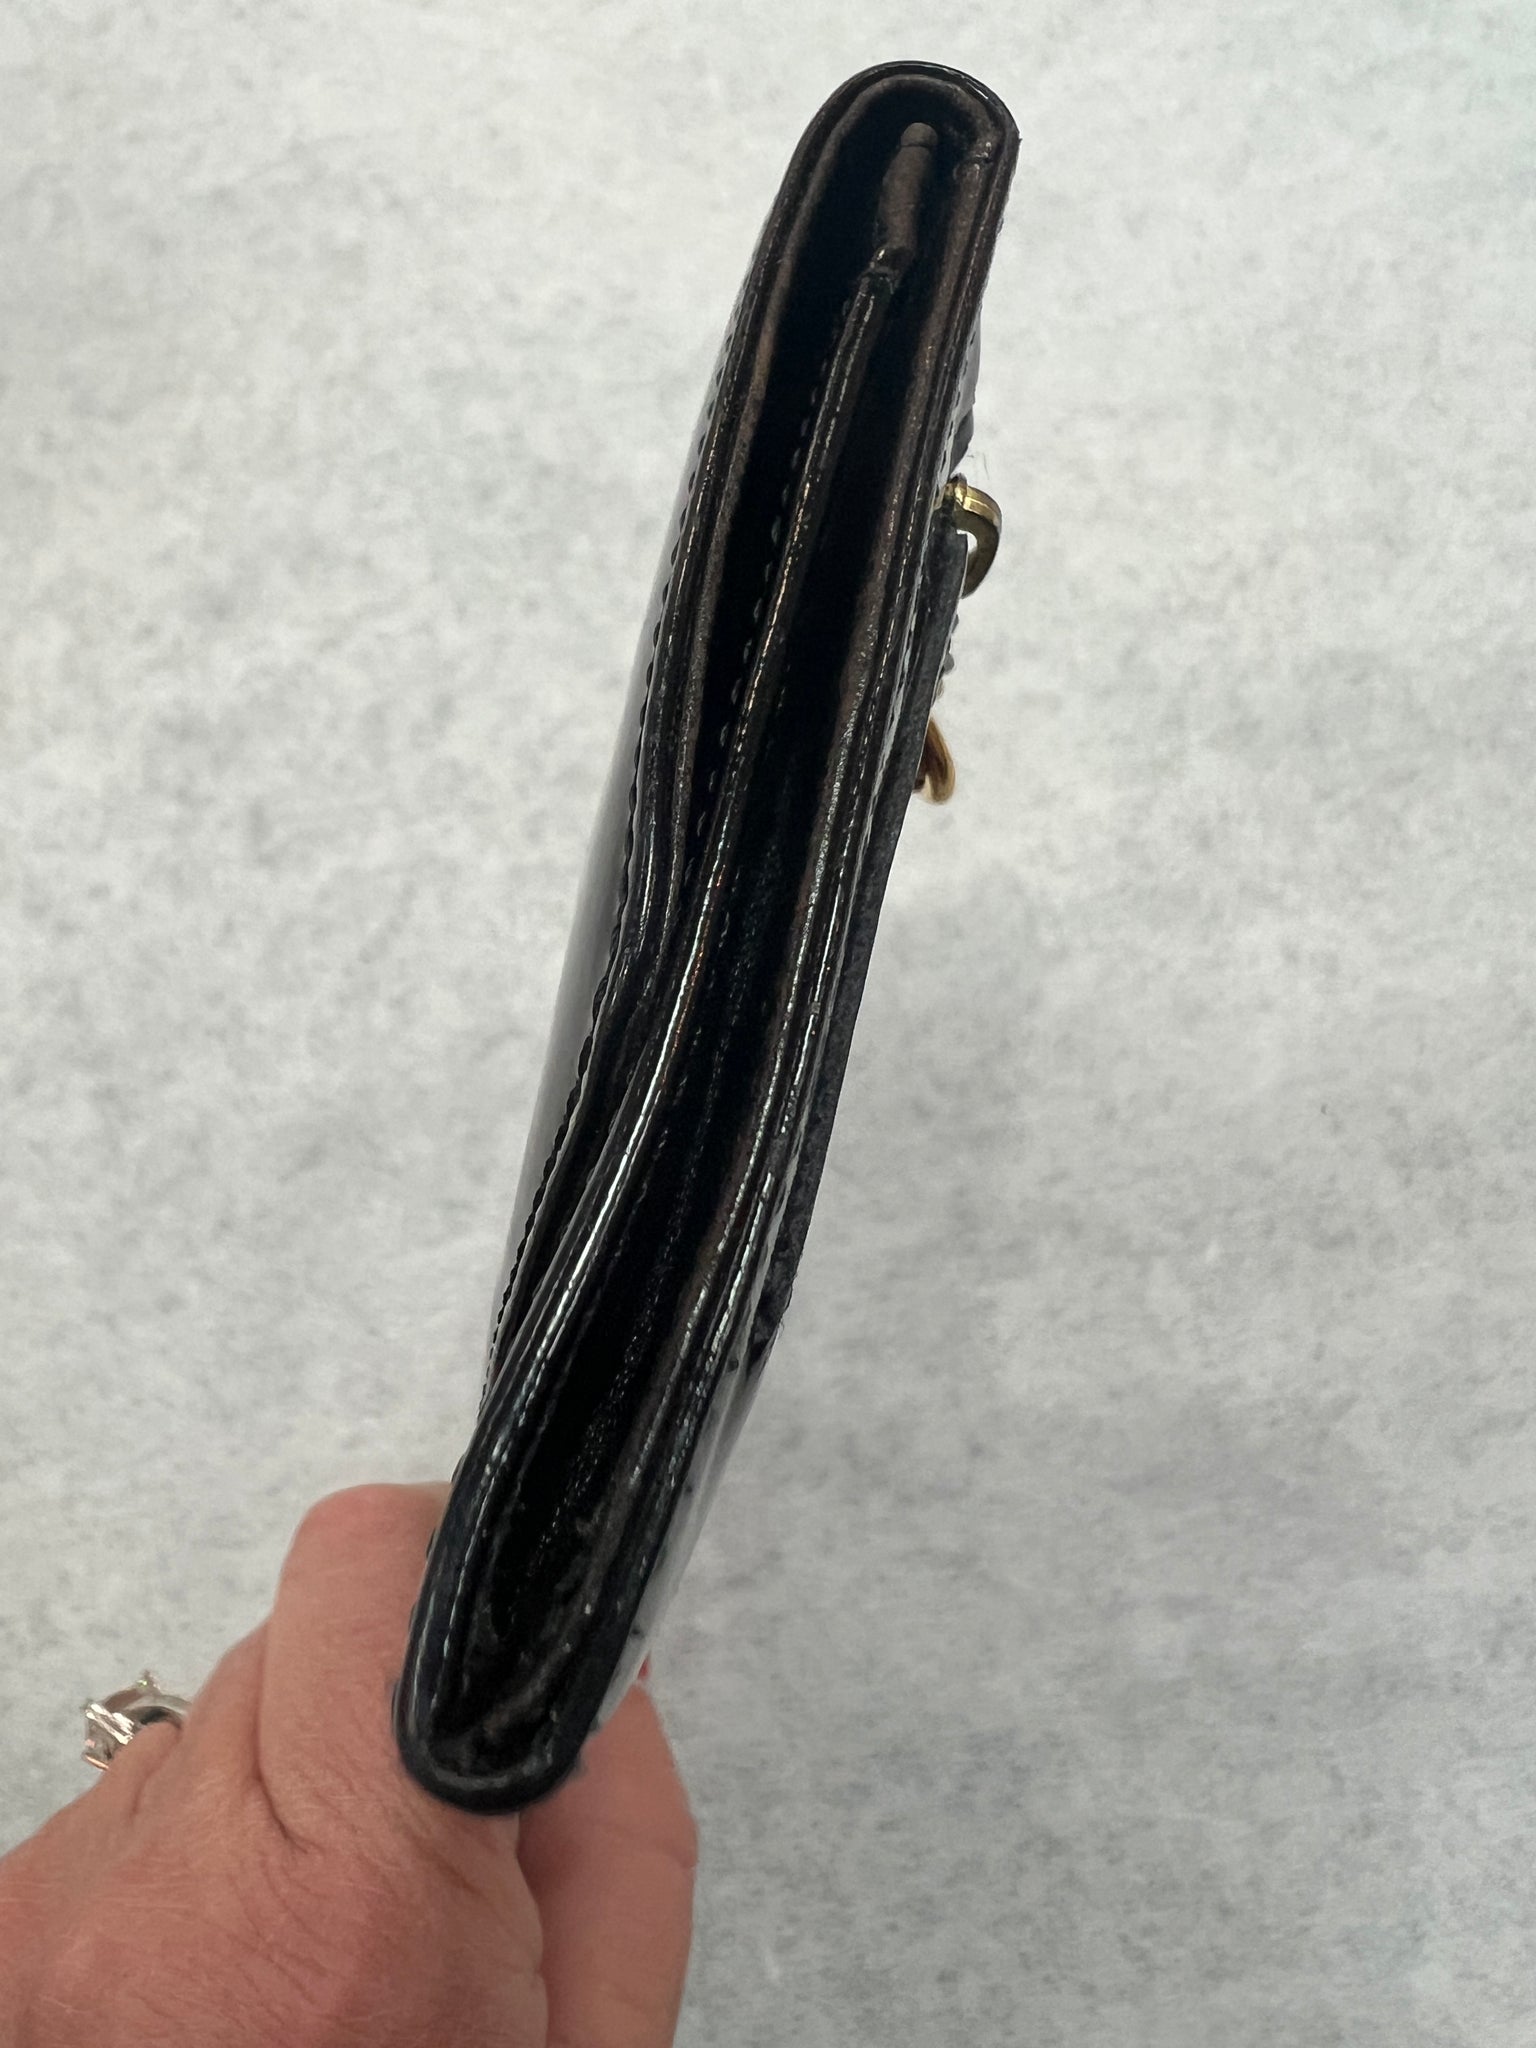 CHANEL Classic Small Flap Wallet Black Patent Leather $799.00